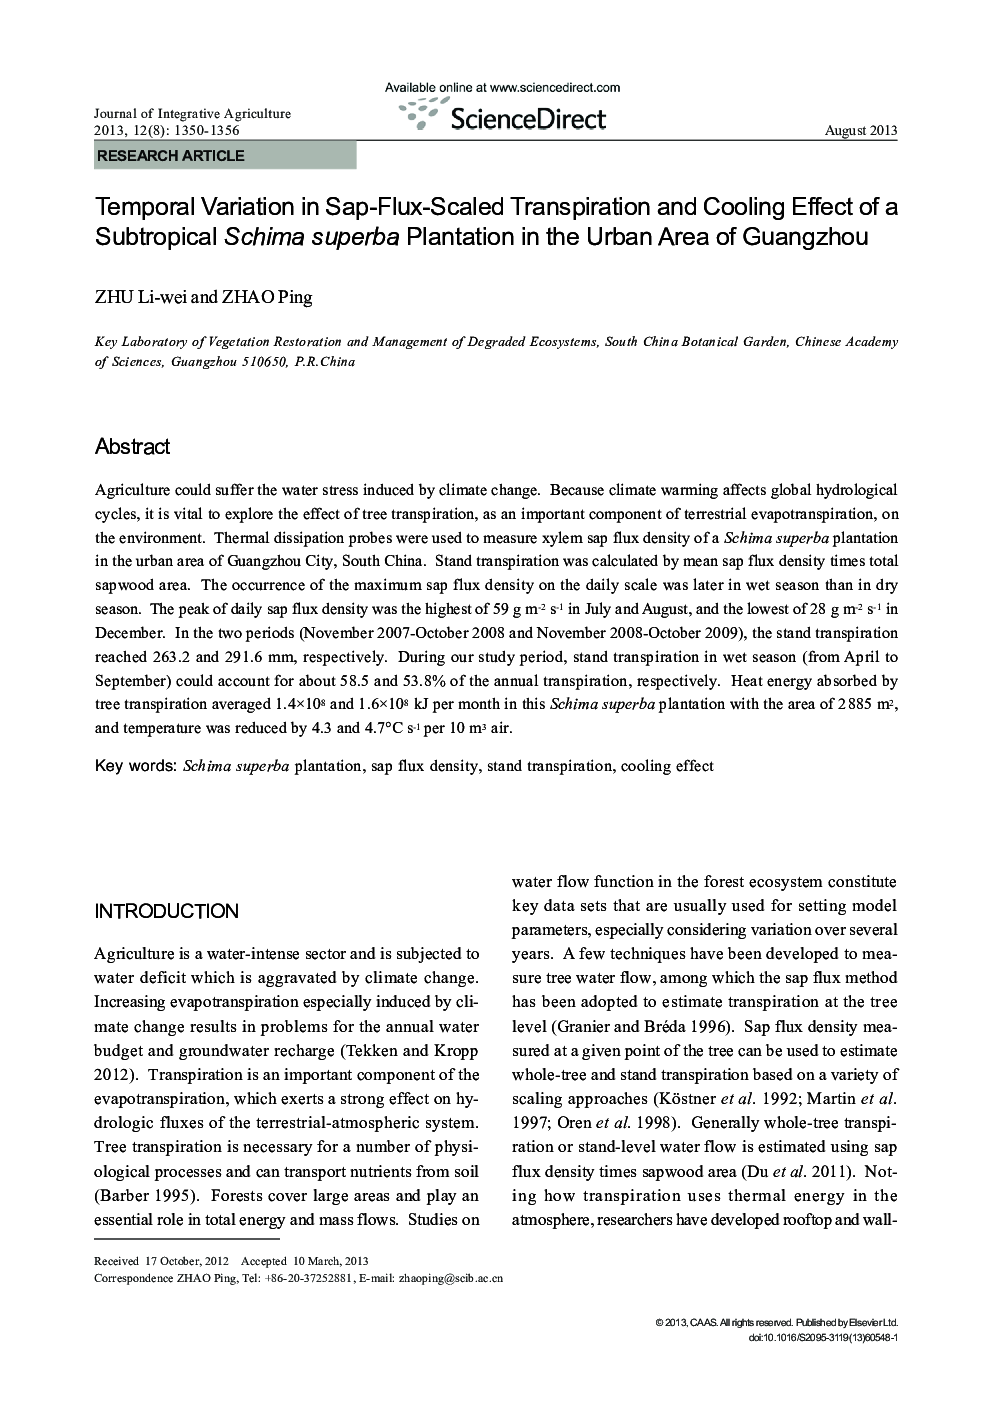 Temporal Variation in Sap-Flux-Scaled Transpiration and Cooling Effect of a Subtropical Schima superba Plantation in the Urban Area of Guangzhou